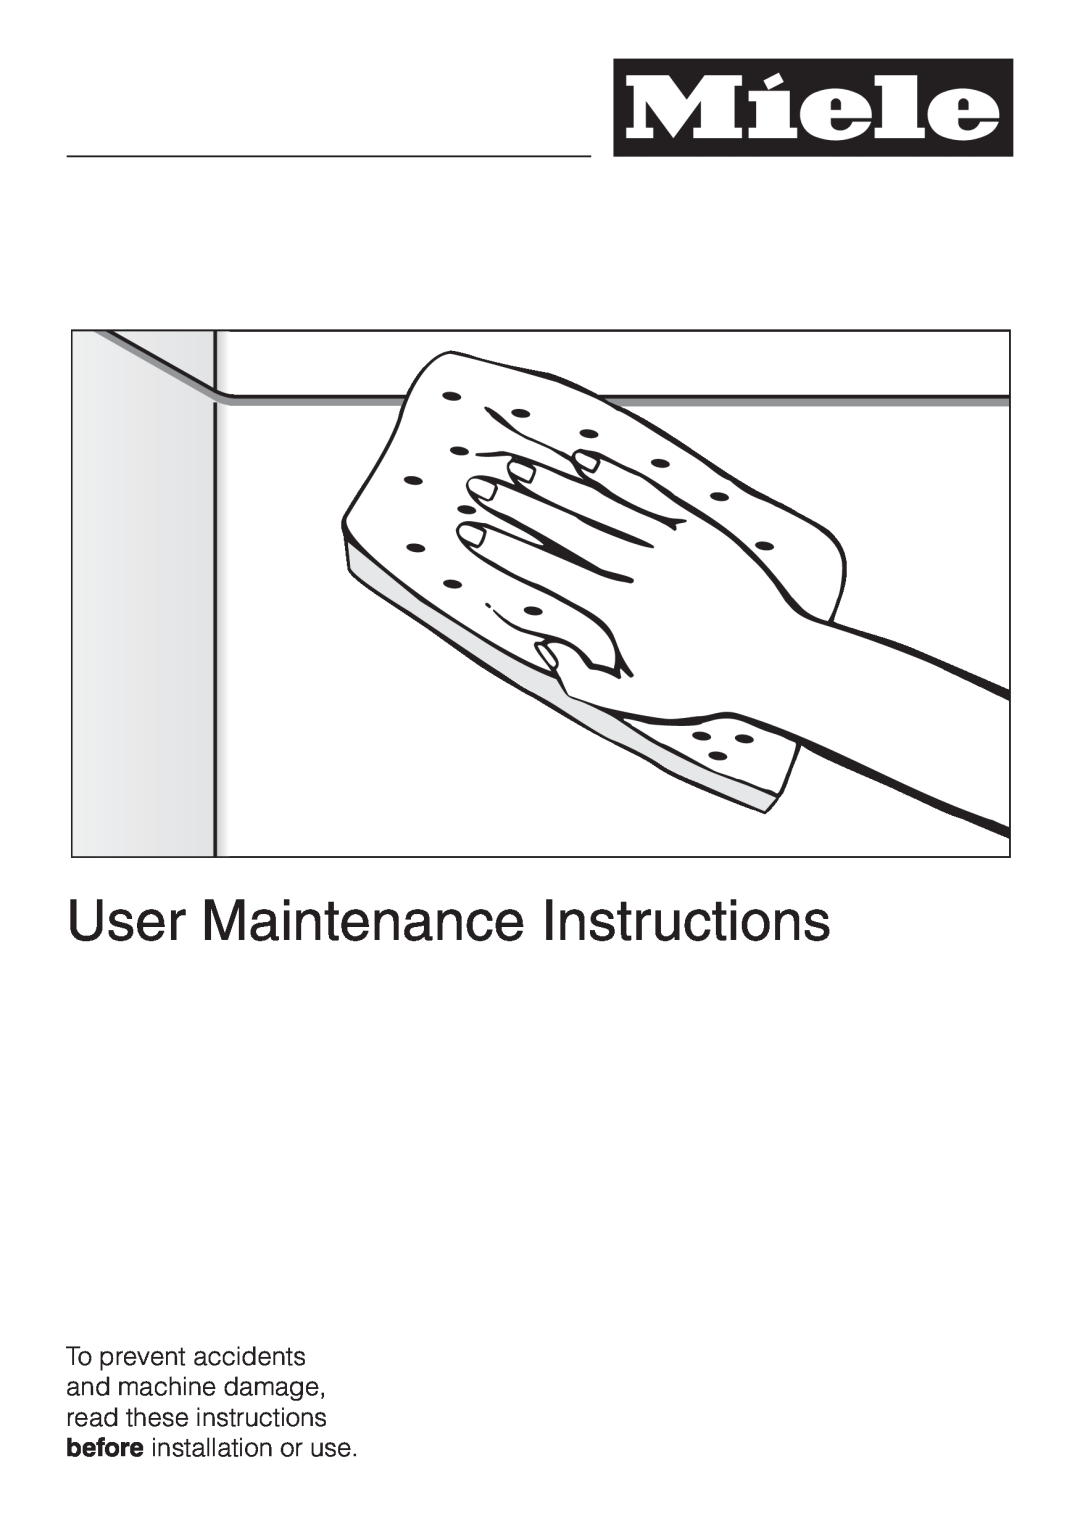 Miele G 2180, G 2170 operating instructions User Maintenance Instructions 